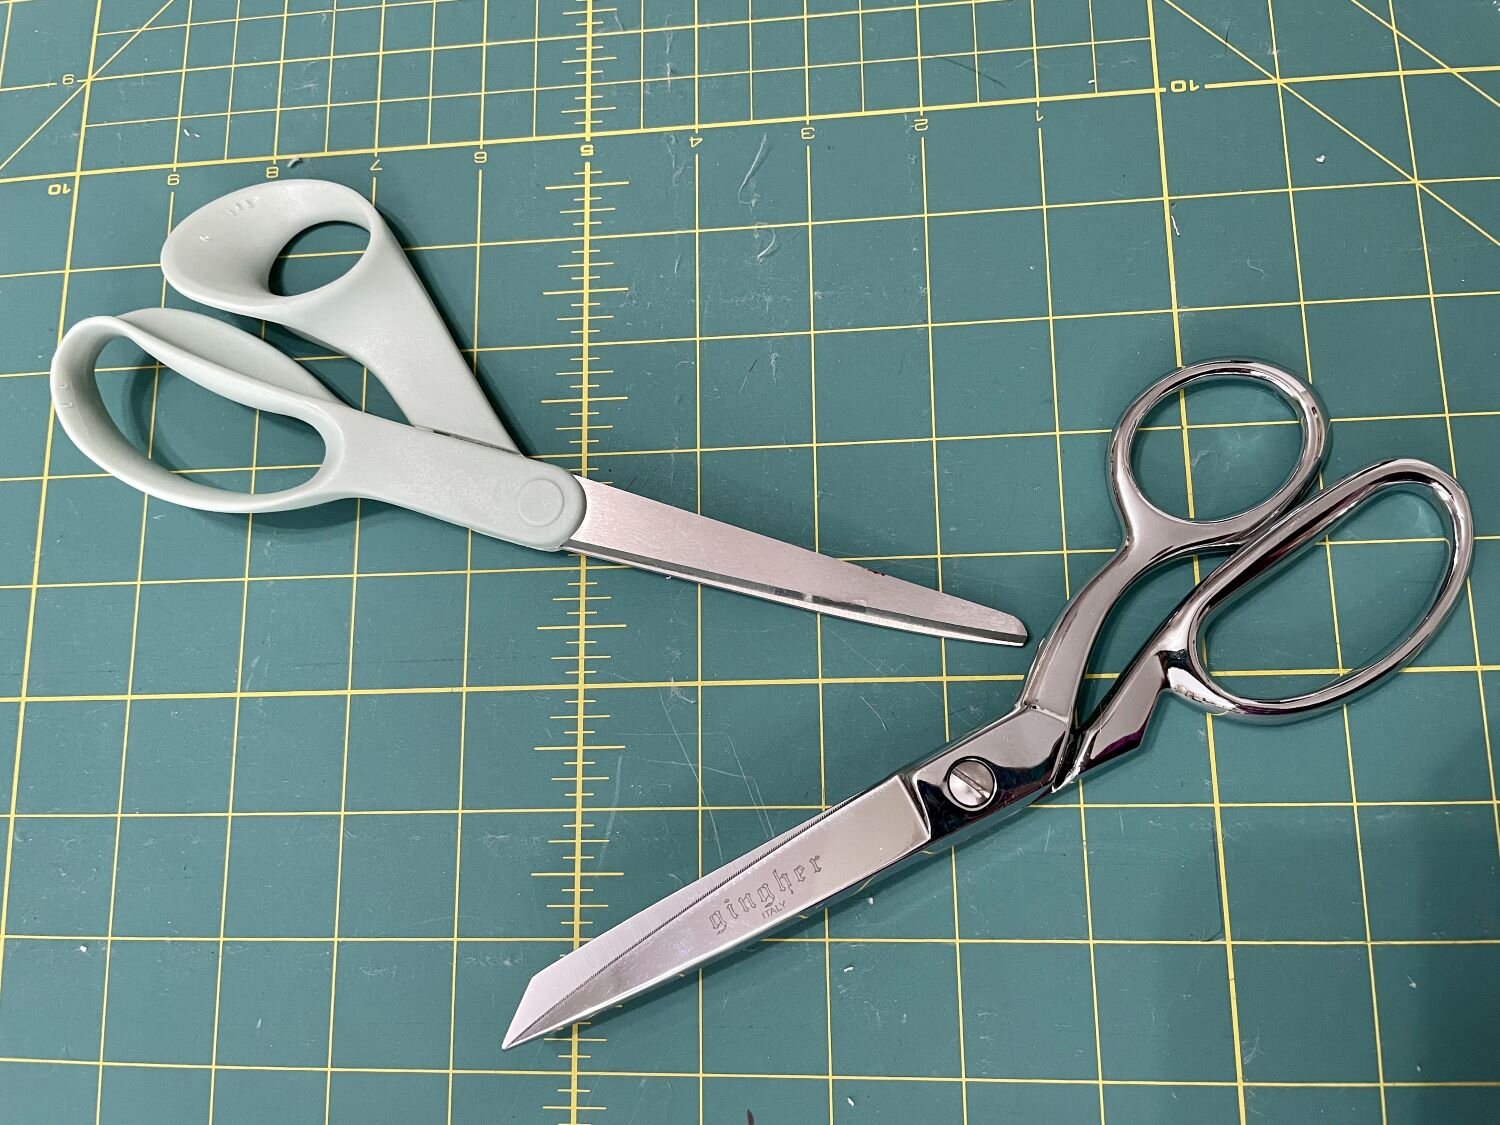 7 Types of Scissors for Sewing That You Must Have